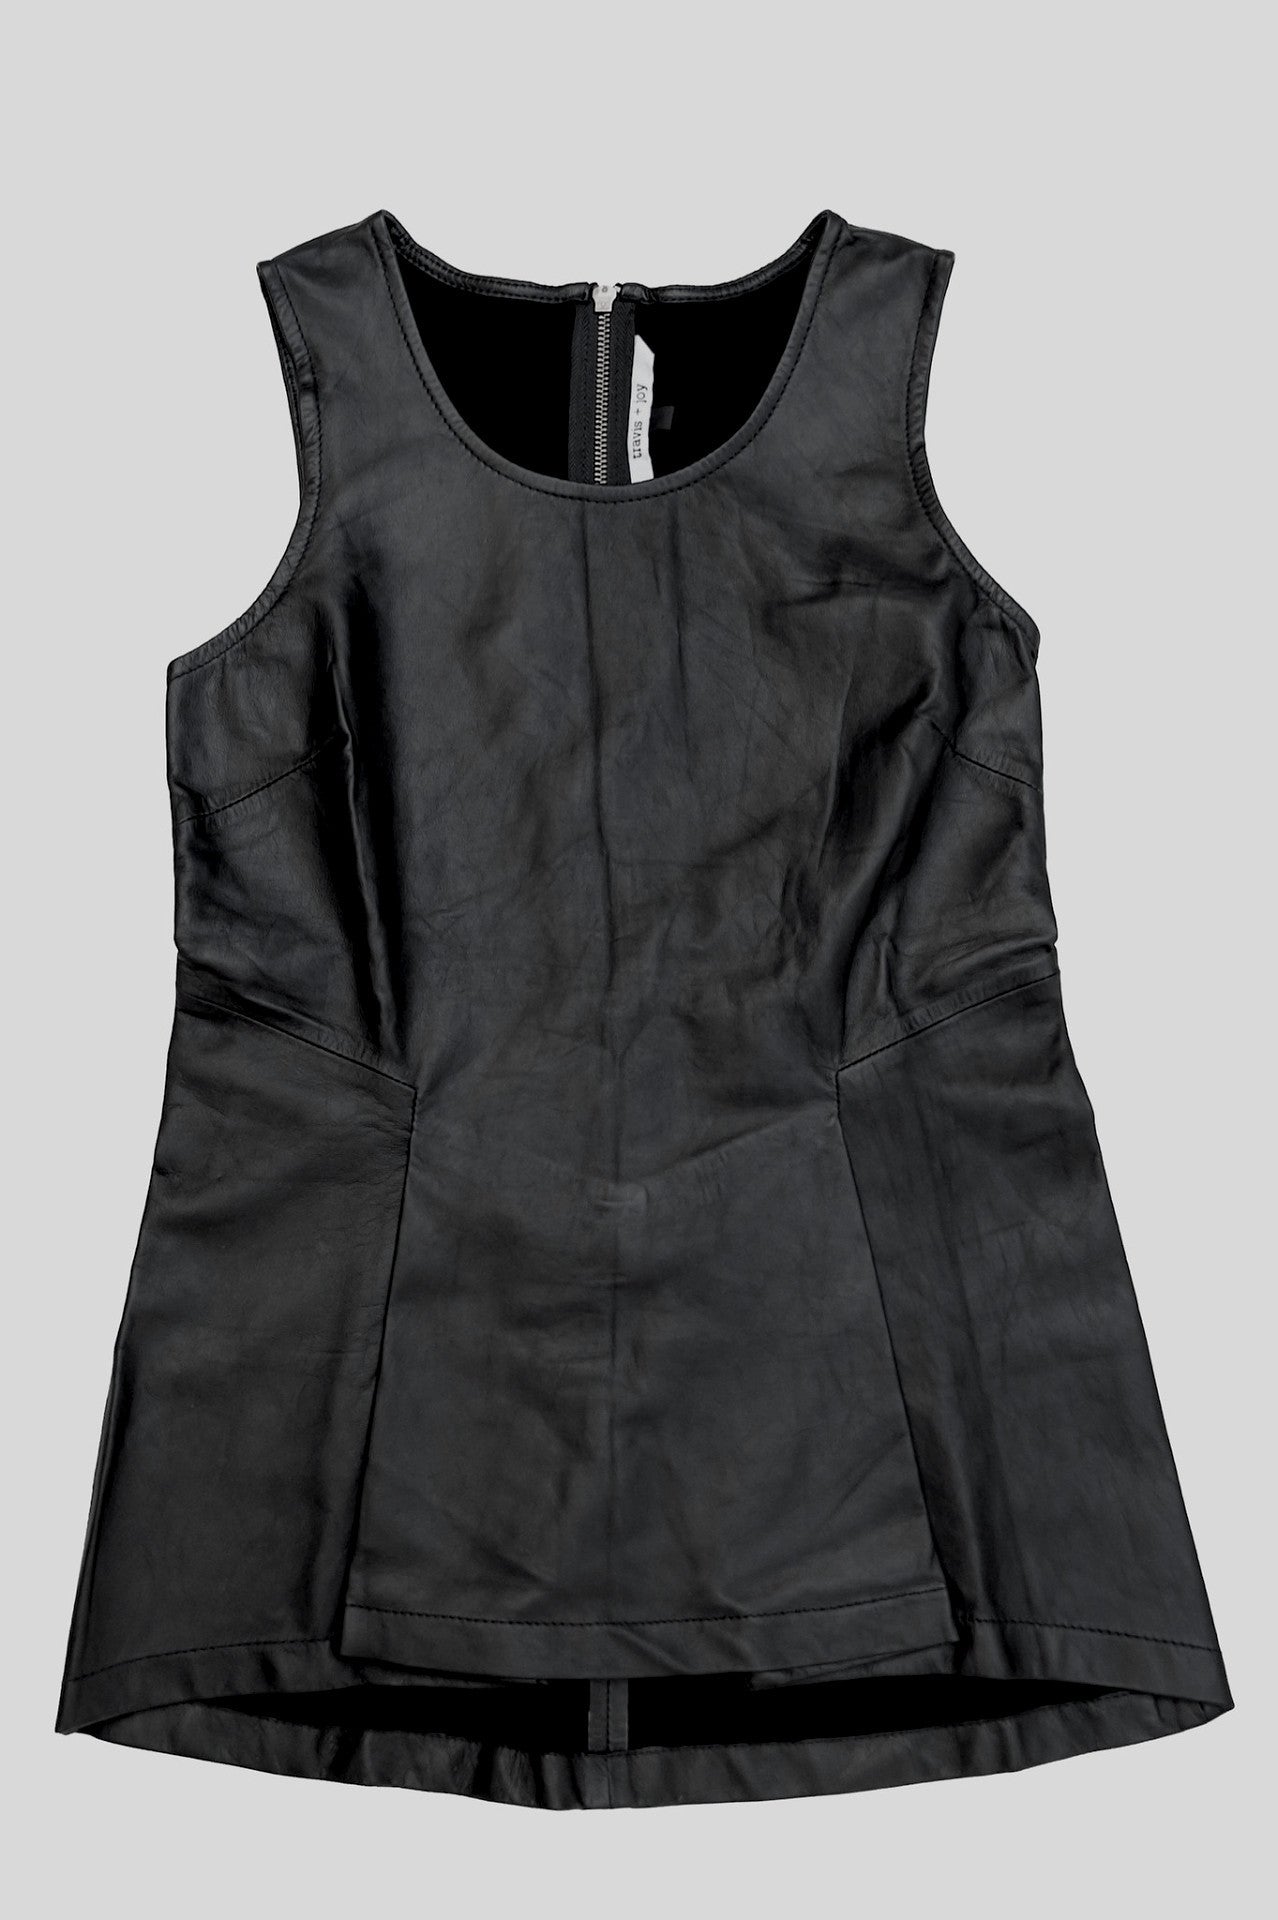 Structure leather peplum top available in black and grey. 100% authentic leather